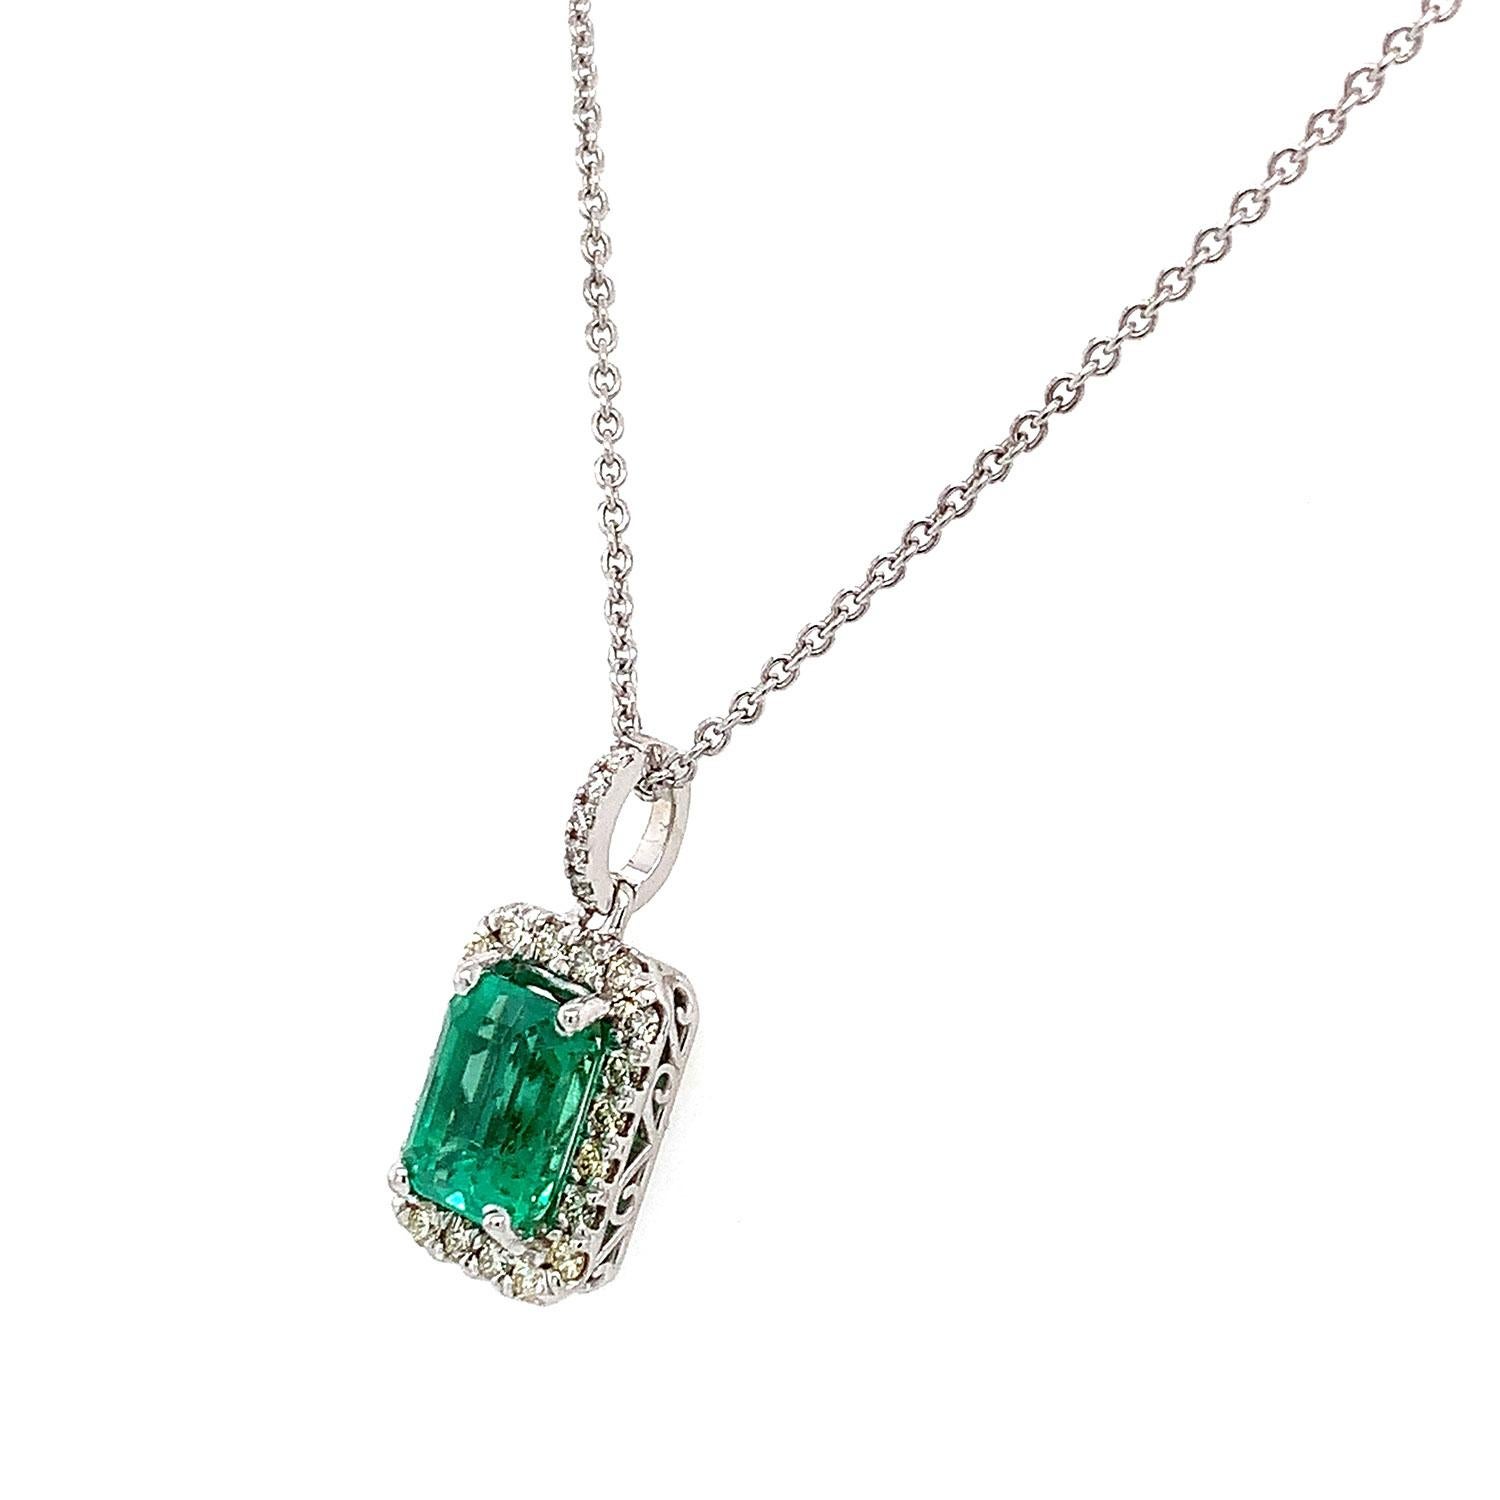 This stunning pendant features a 2.11 Carat Green Emerald with exceptional clarity and luster surrounded by a halo of diamonds in weight of 0.32 Carat. Experience the difference in person!

Product details: 

Center Gemstone Type: Emerald
Center